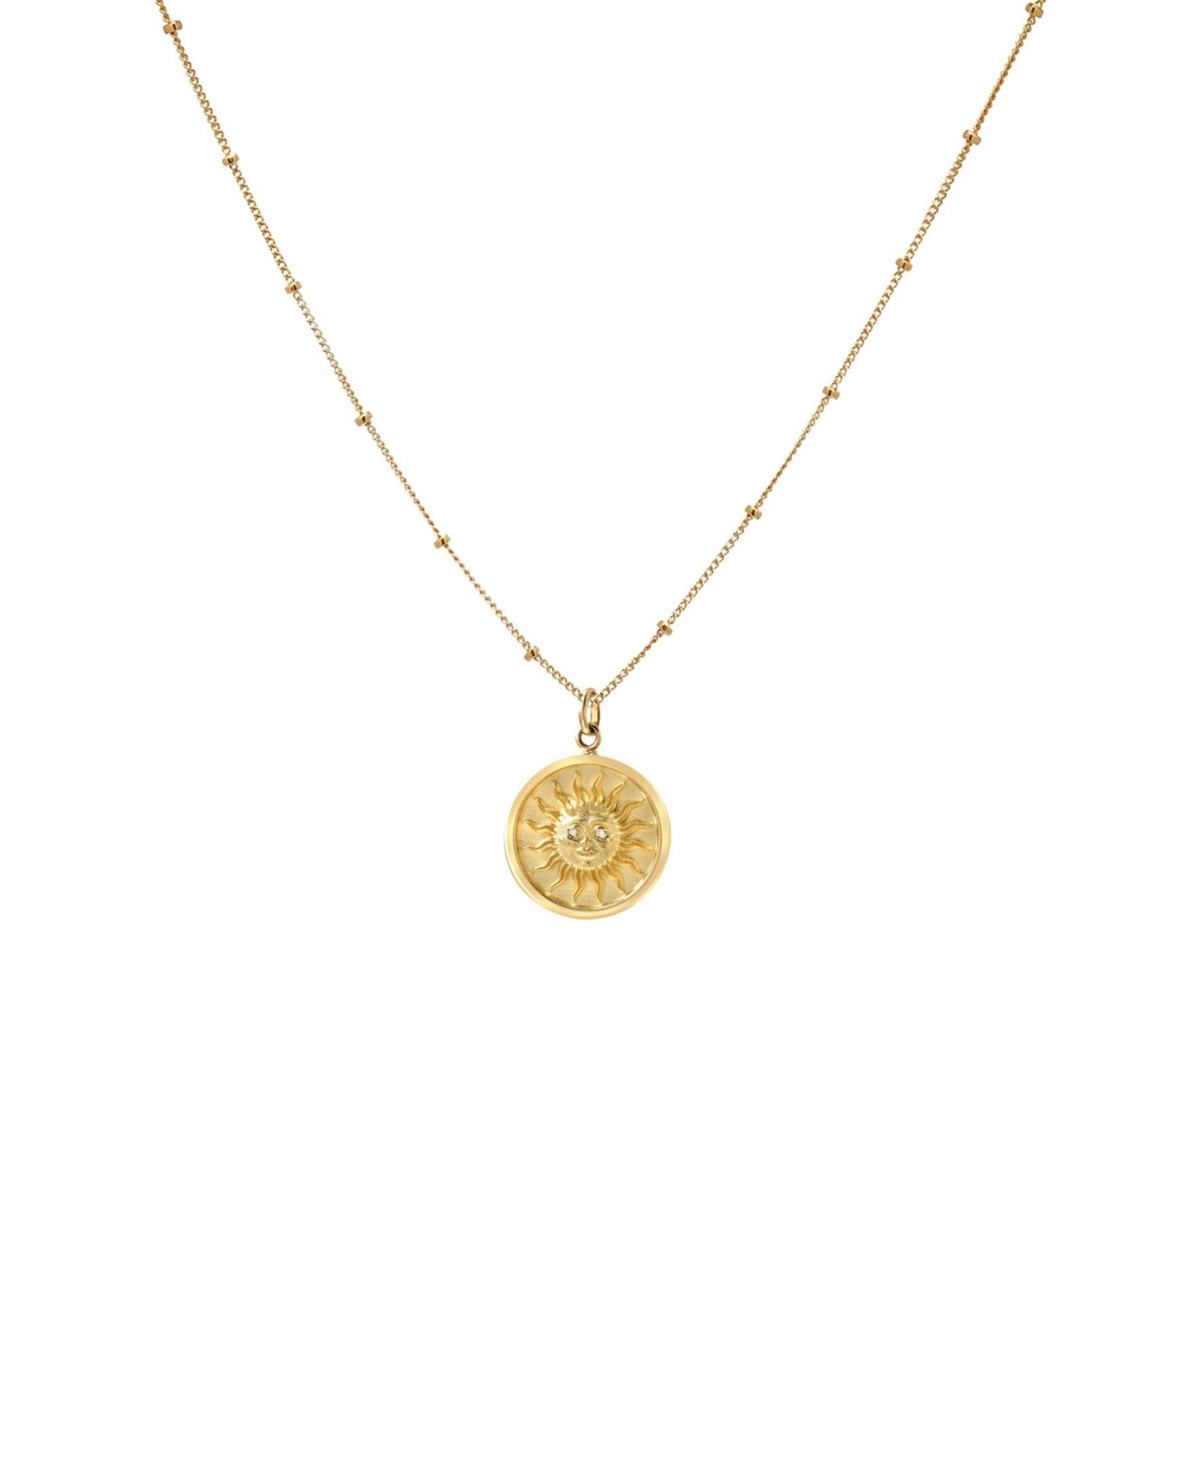 Sun Medallion with Segment 14K Yellow Gold Chain Necklace - Gold